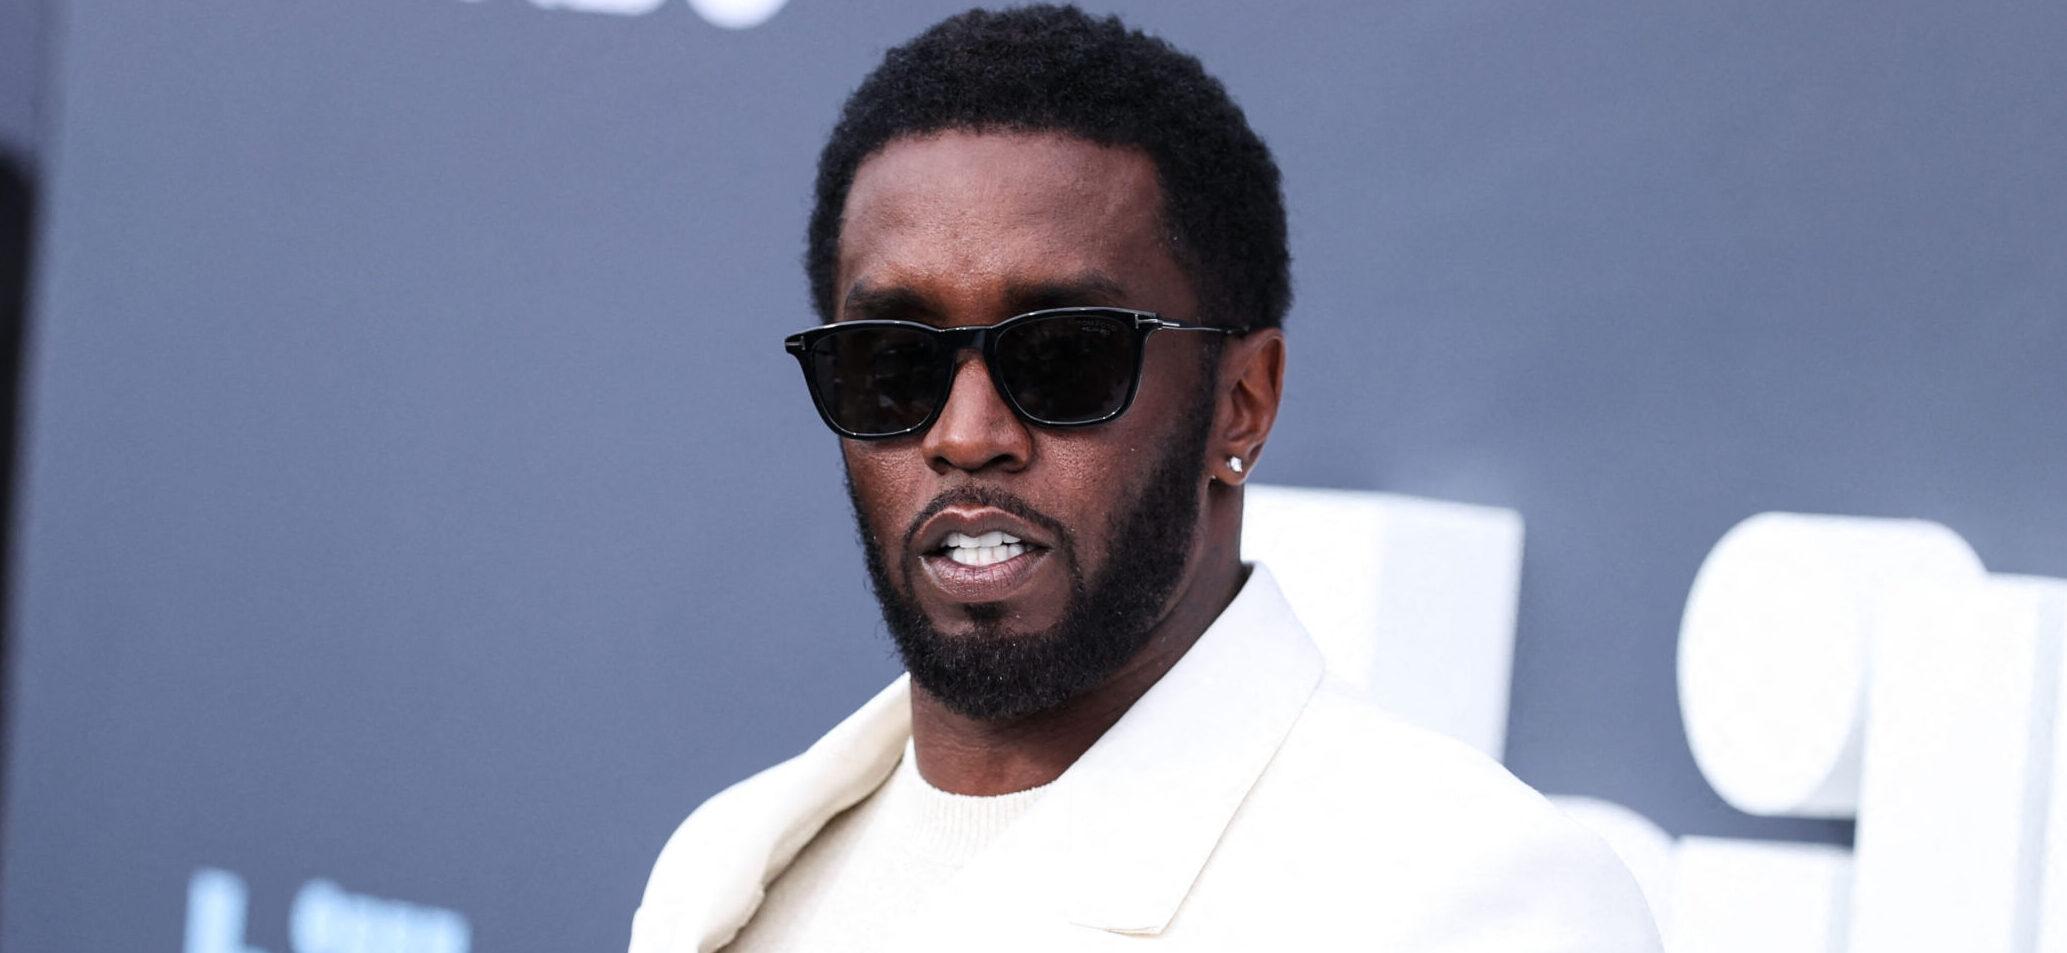 Diddy at the 2022 Billboard Music Awards held at the MGM Grand Garden Arena on May 15, 2022 in Las Vegas, Nevada, United States